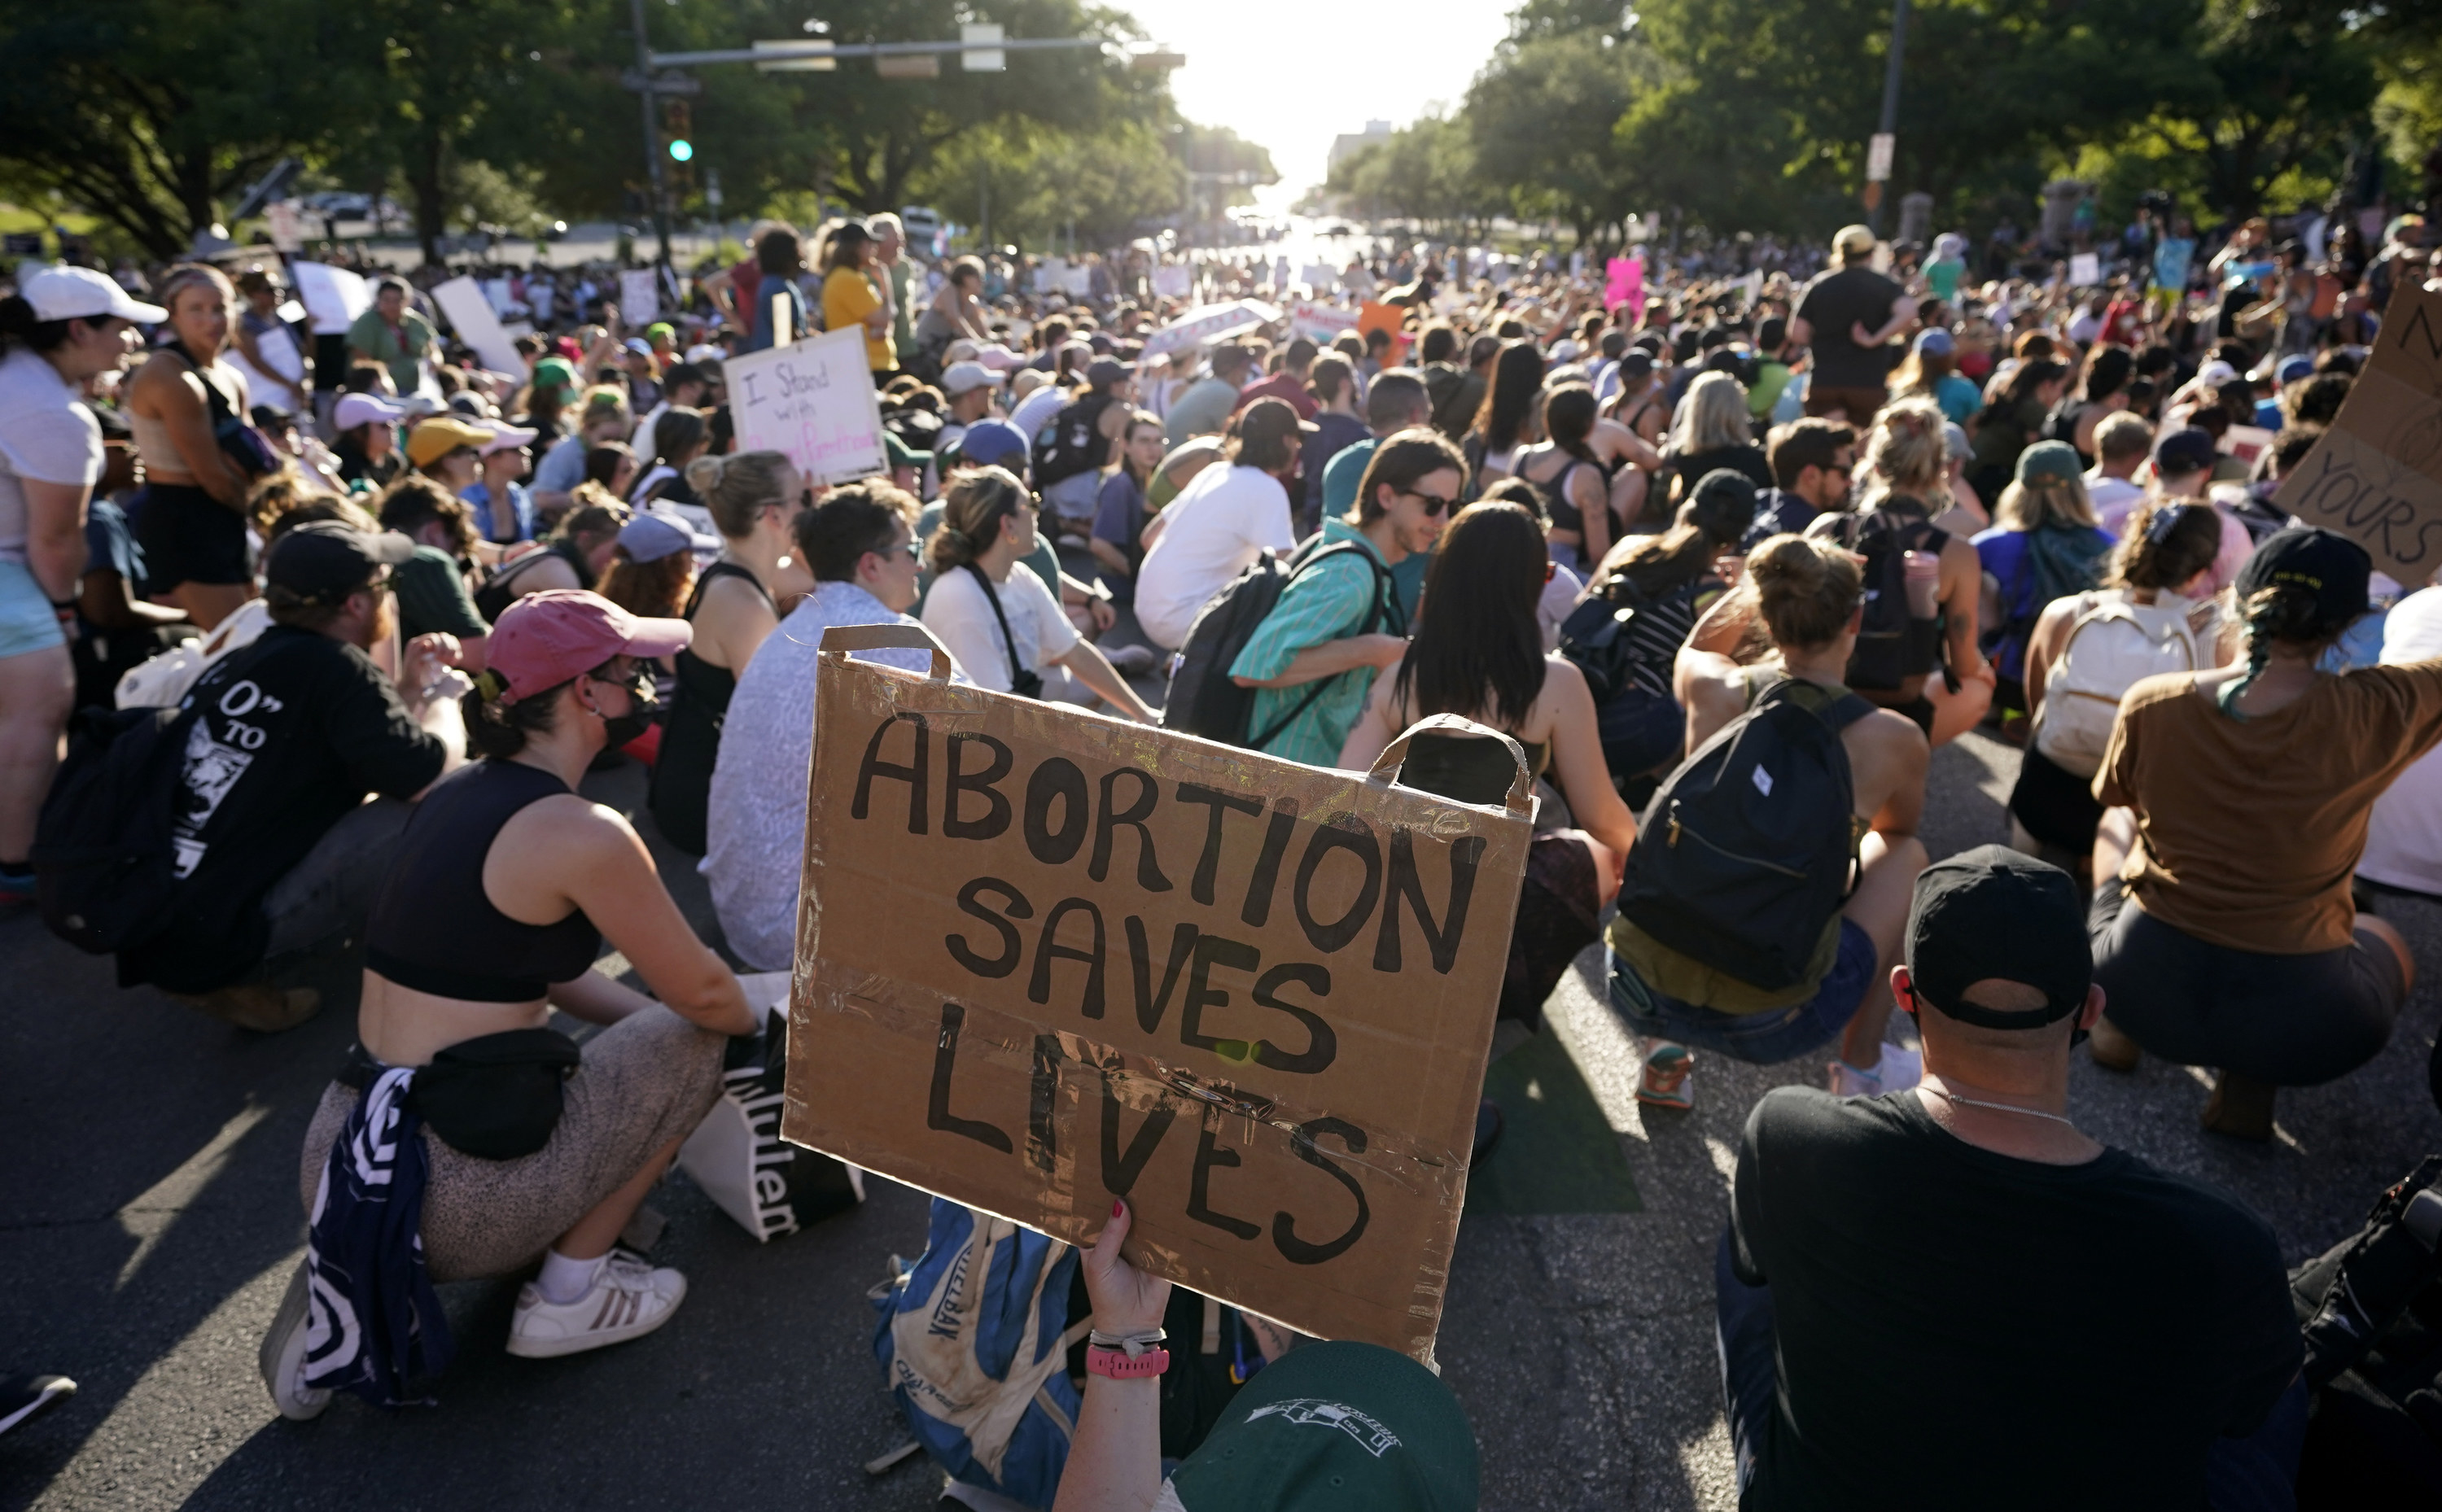 A large crowd, some with signs, including &quot;Abortion saves lives&quot;